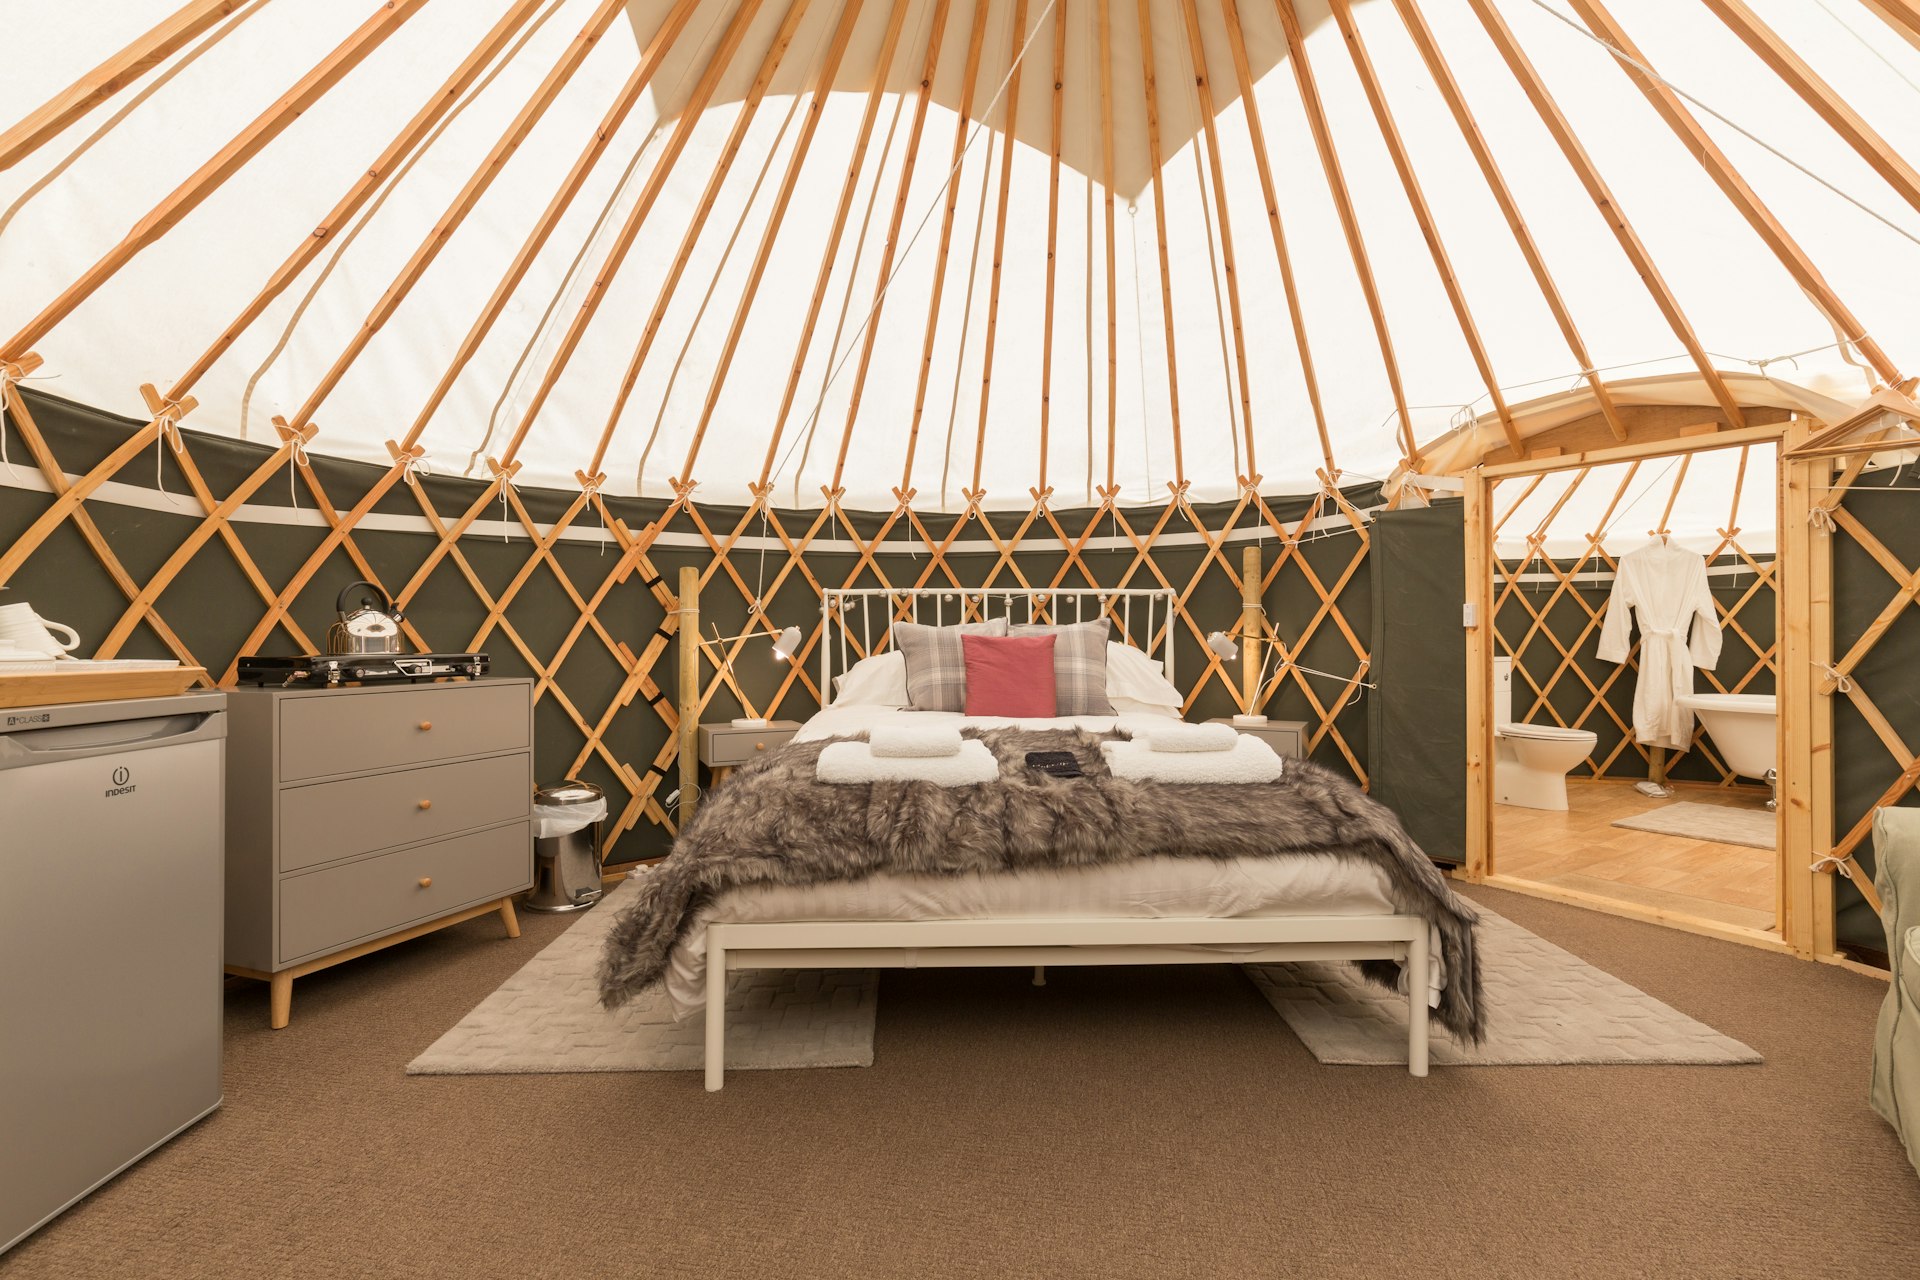 Interior shot of a large double bed in a round room with a white and wood canvas roof